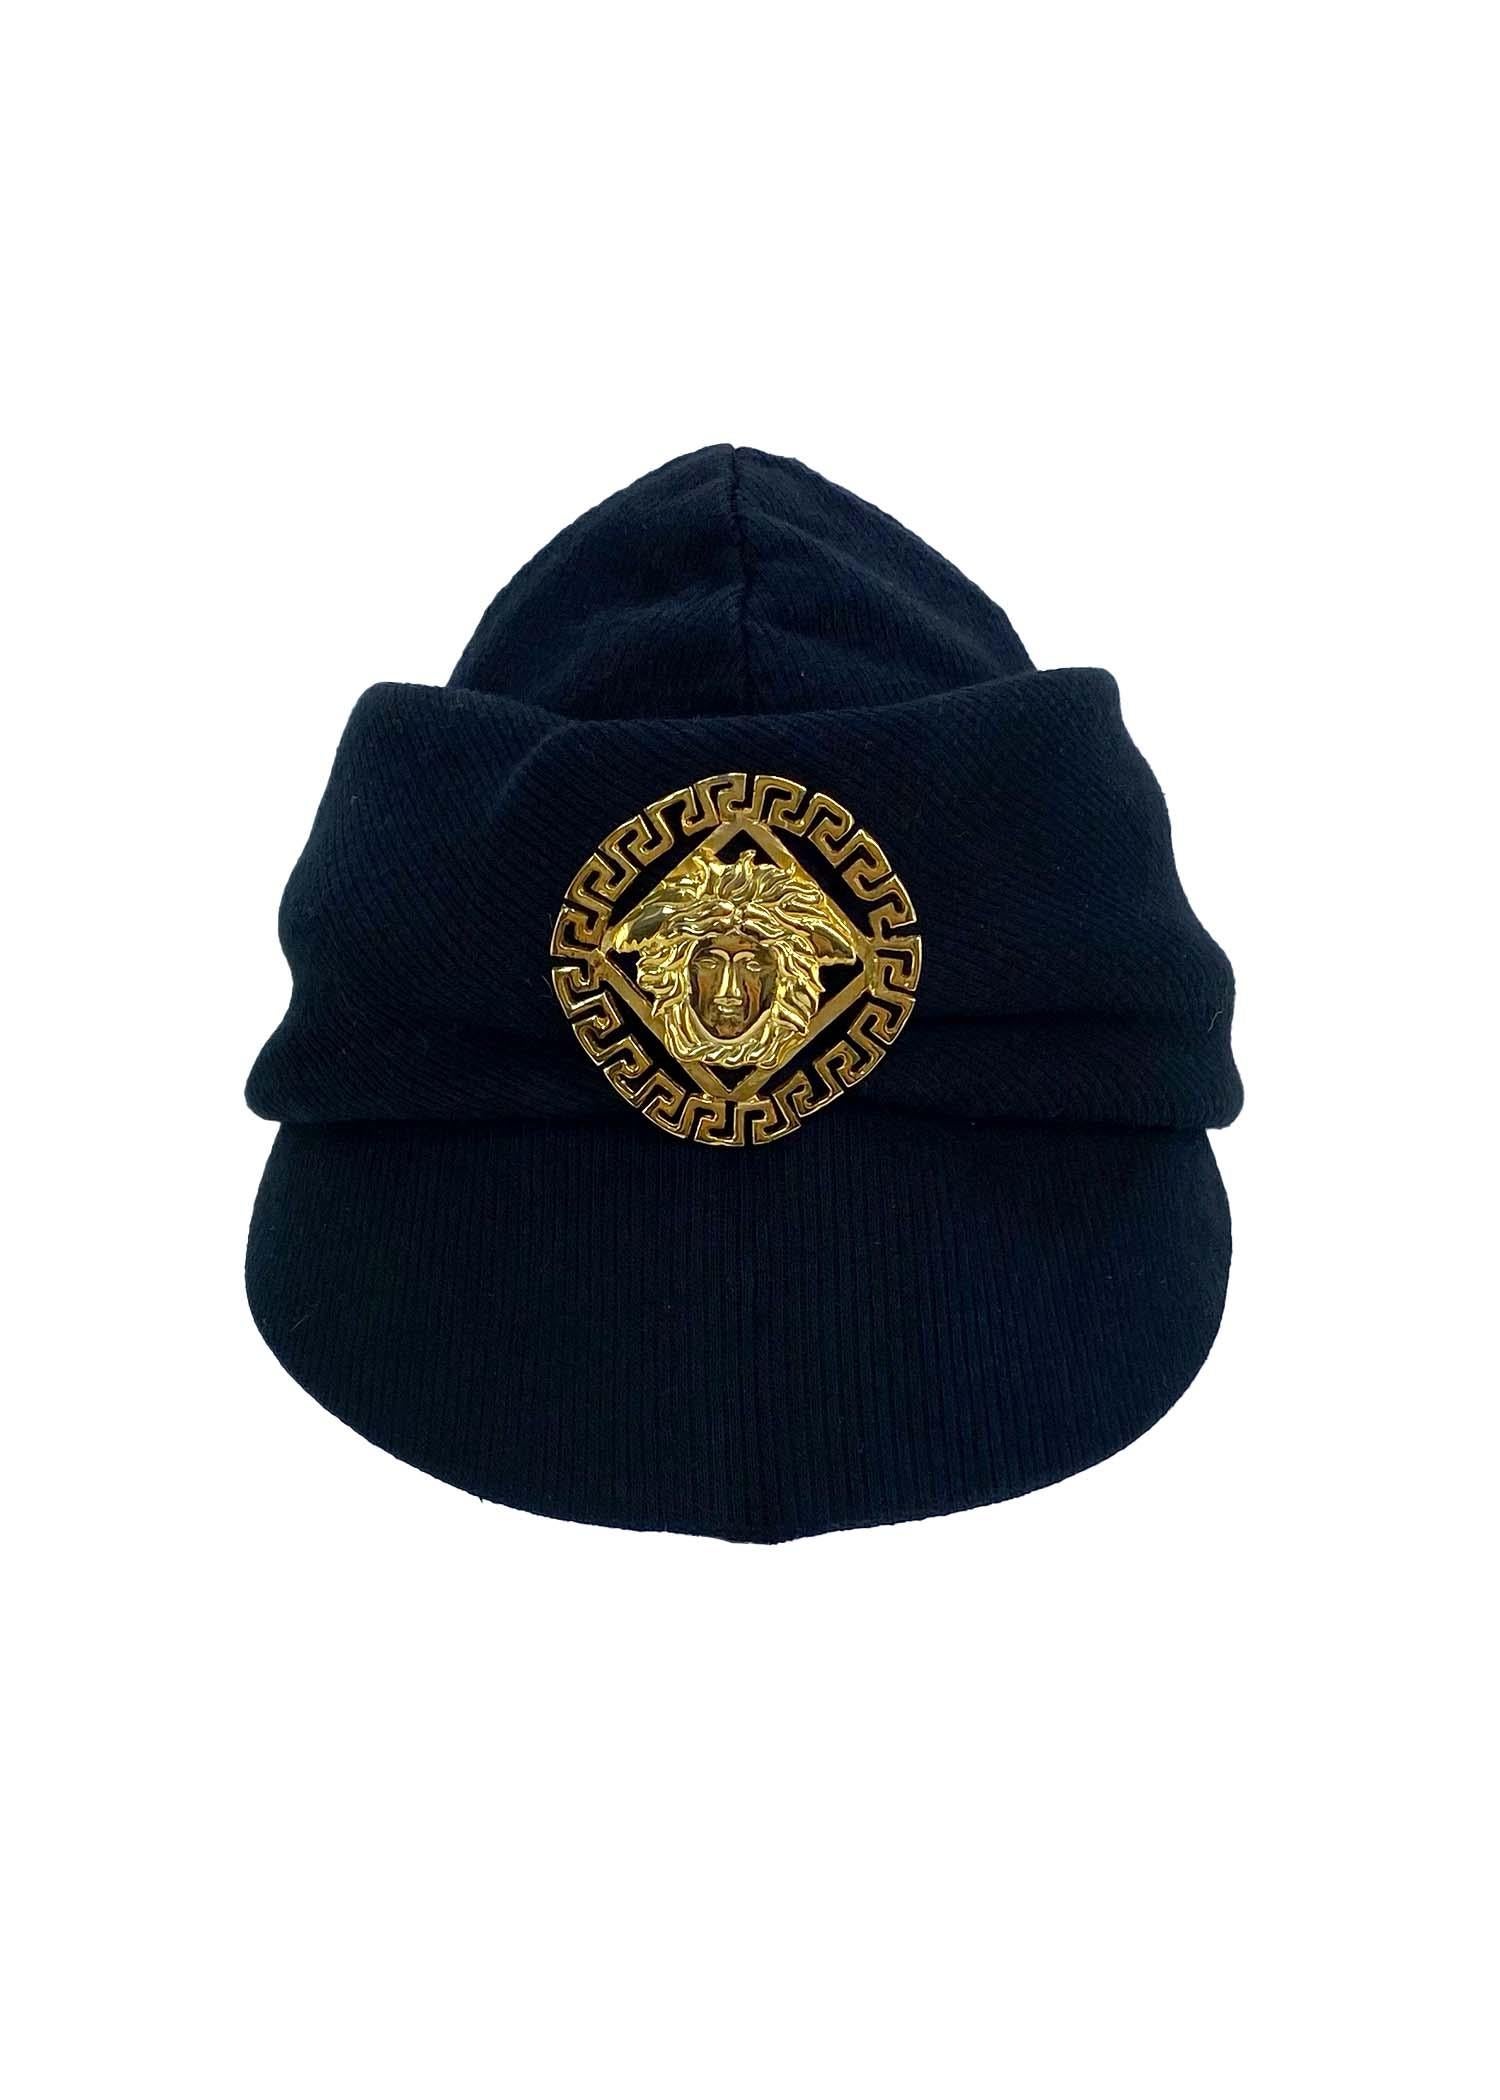 Presenting a chic Gianni Versace Couture hat, designed by Gianni Versace. From the early 1990s, this brimmed hat in black wool prominently features a large gold Medusa logo emblem on the front. With a smaller brim and wrap around the hat, this isn't